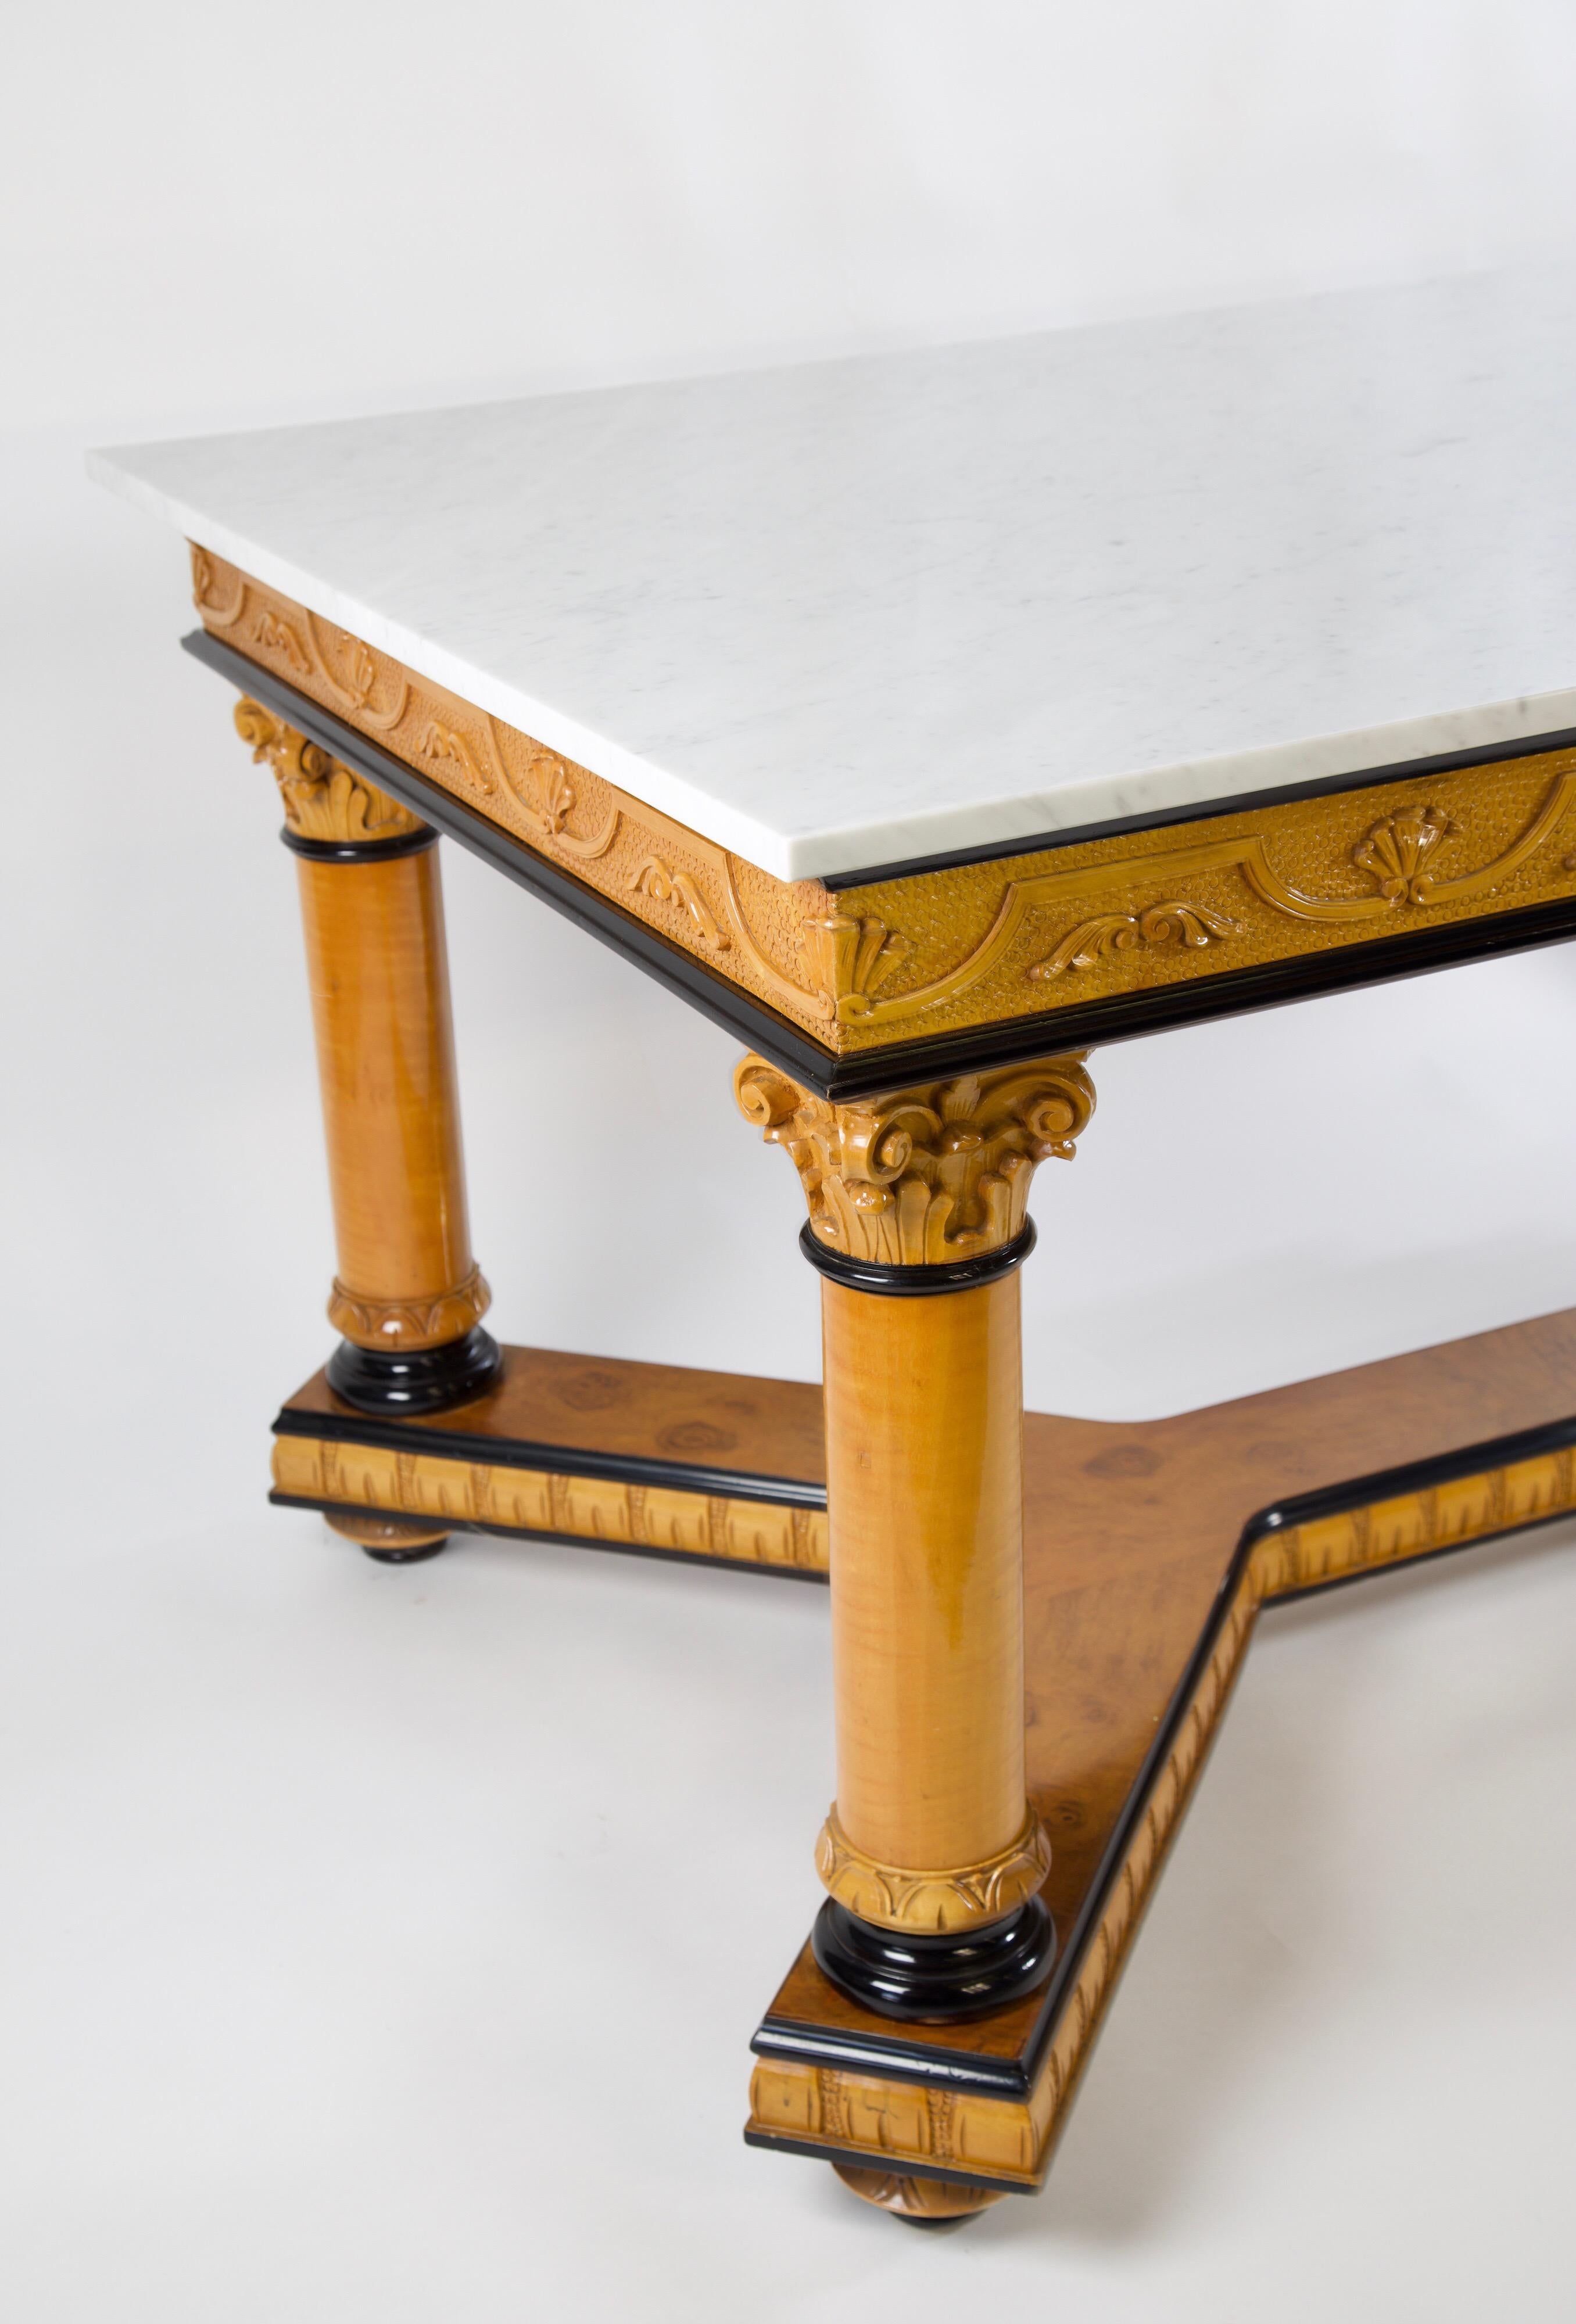 Biedermeier dining table with bird's-eye maple veneer and Carrara marble. Could be used in a library, as an entry table, dining table or even a desk. This piece of art has an acanthus leaf design atop capitals of the column legs with black ebonized